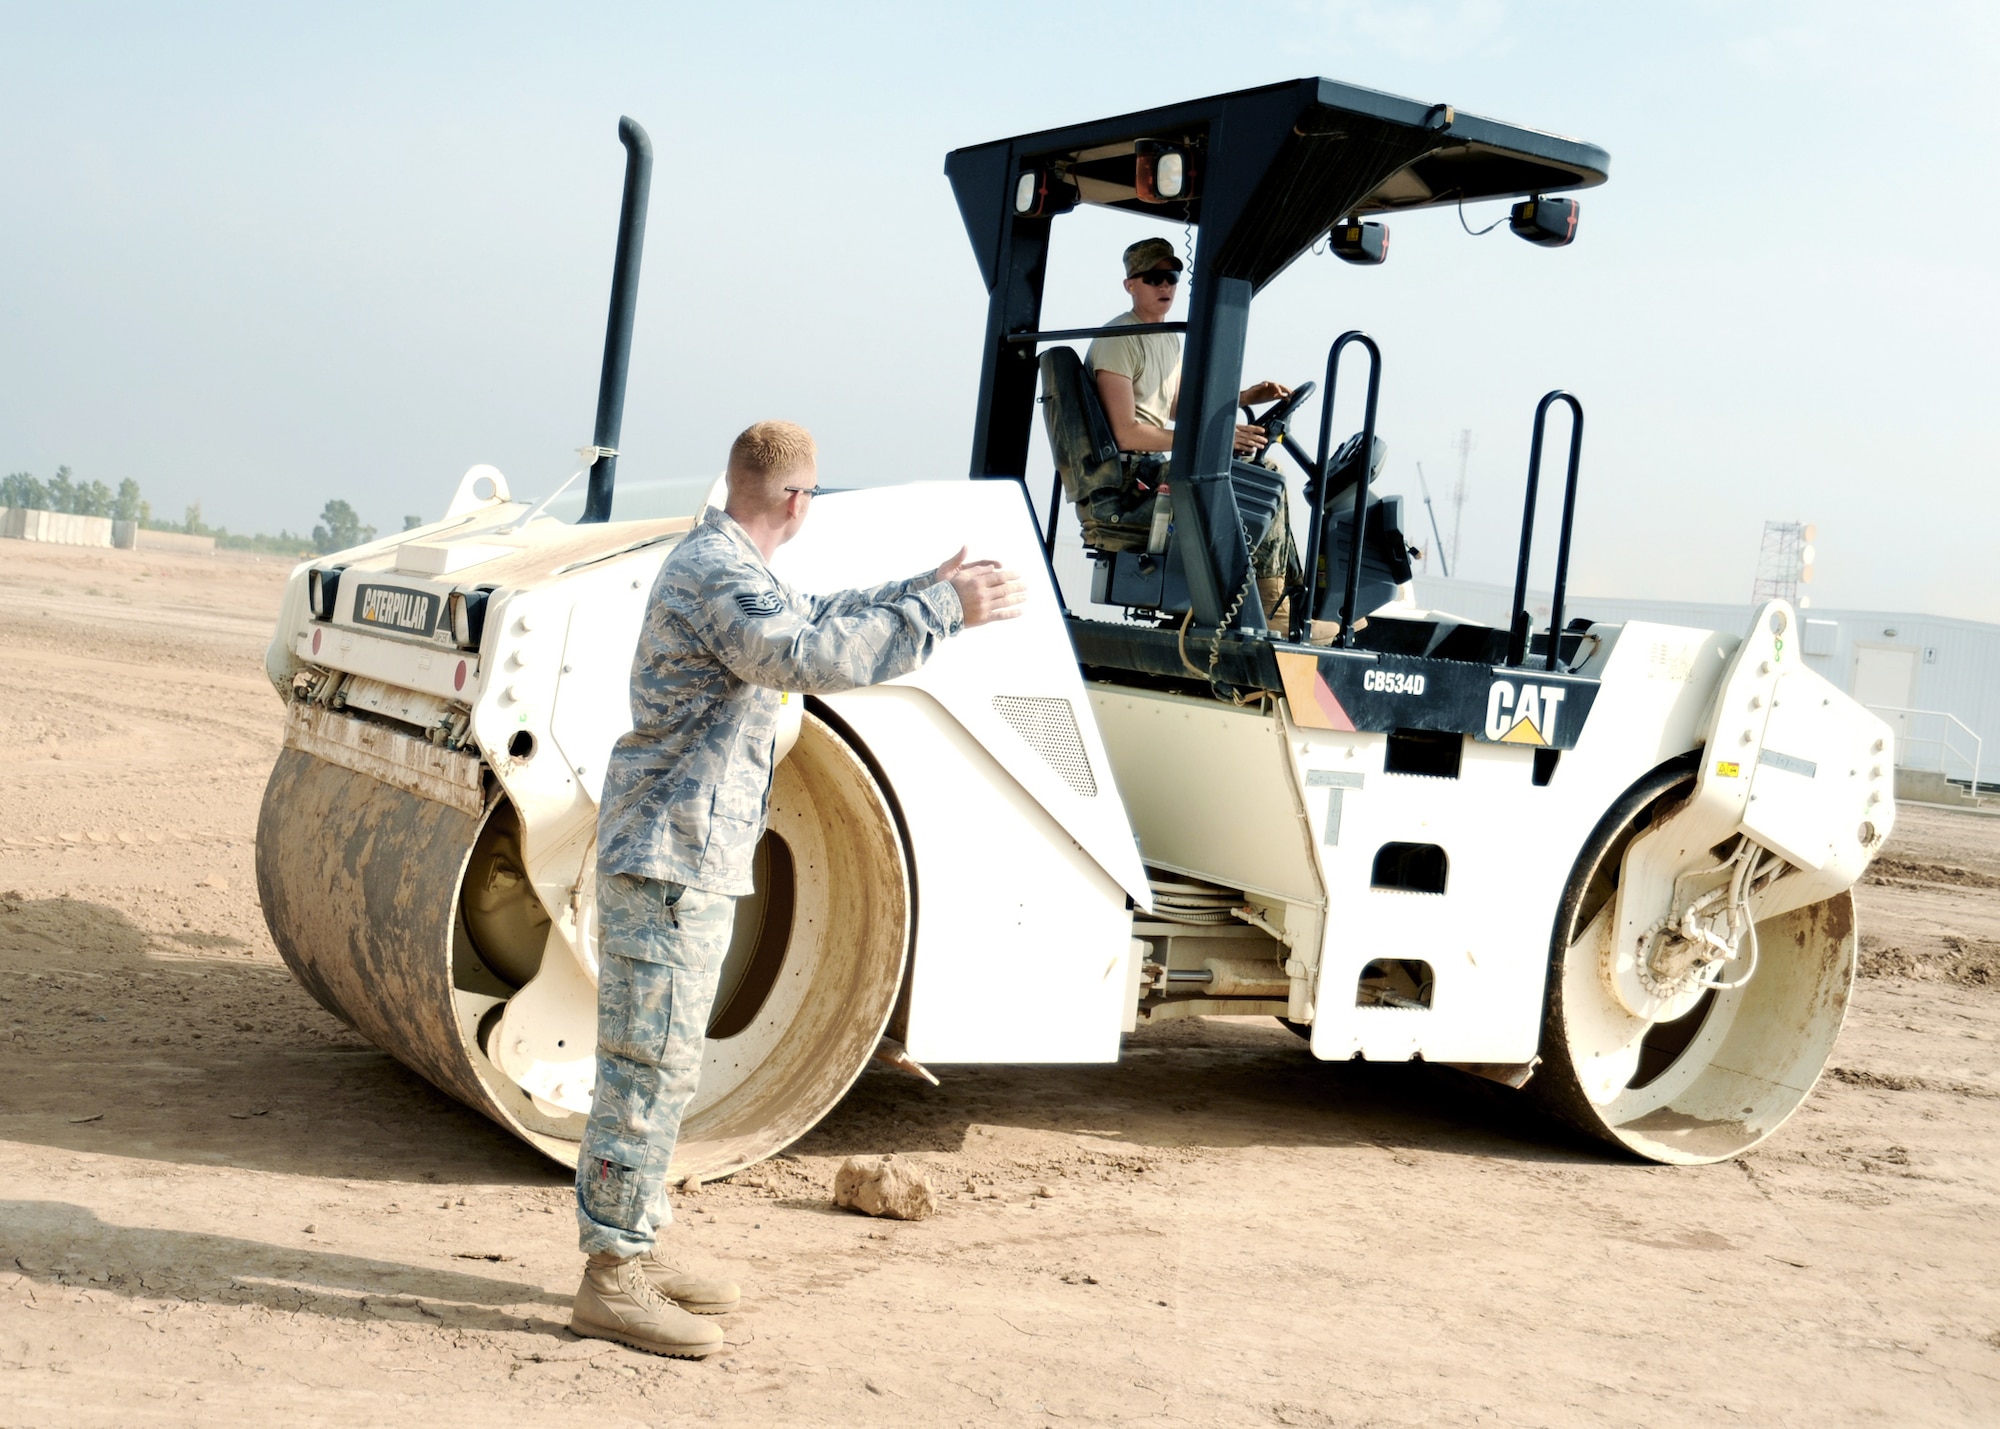 JOINT BASE BALAD, Iraq -- Tech. Sgt. Orlin Rohde, 732nd Expeditionary Civil Engineer Squadron heavy equipment operator and project manager, directs Airman Marshall Hess as he drives a vibratory roller to prepare the grounds for a new container repair yard Nov. 2, 2009. By using containers repaired here instead of purchasing new ones, the projected savings total more than $100 million as military assets withdraw from Iraq. (U.S. Air Force photo/Senior Airman Christopher Hubenthal) 